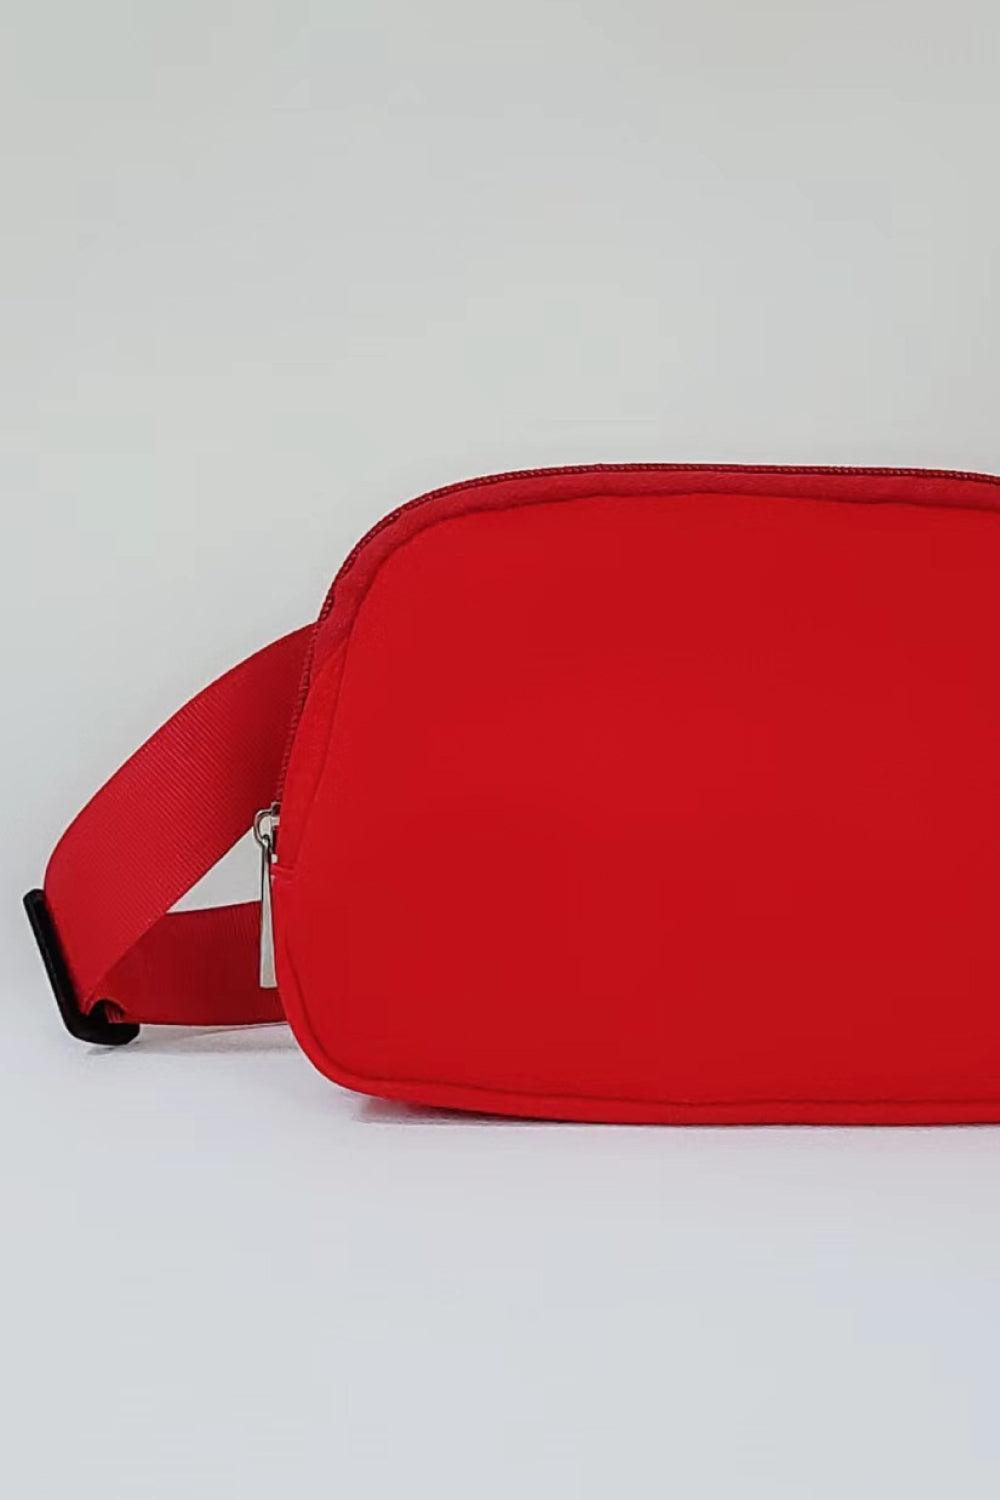 Buckle Zip Closure Fanny Pack: Ultimate Convenience & Style